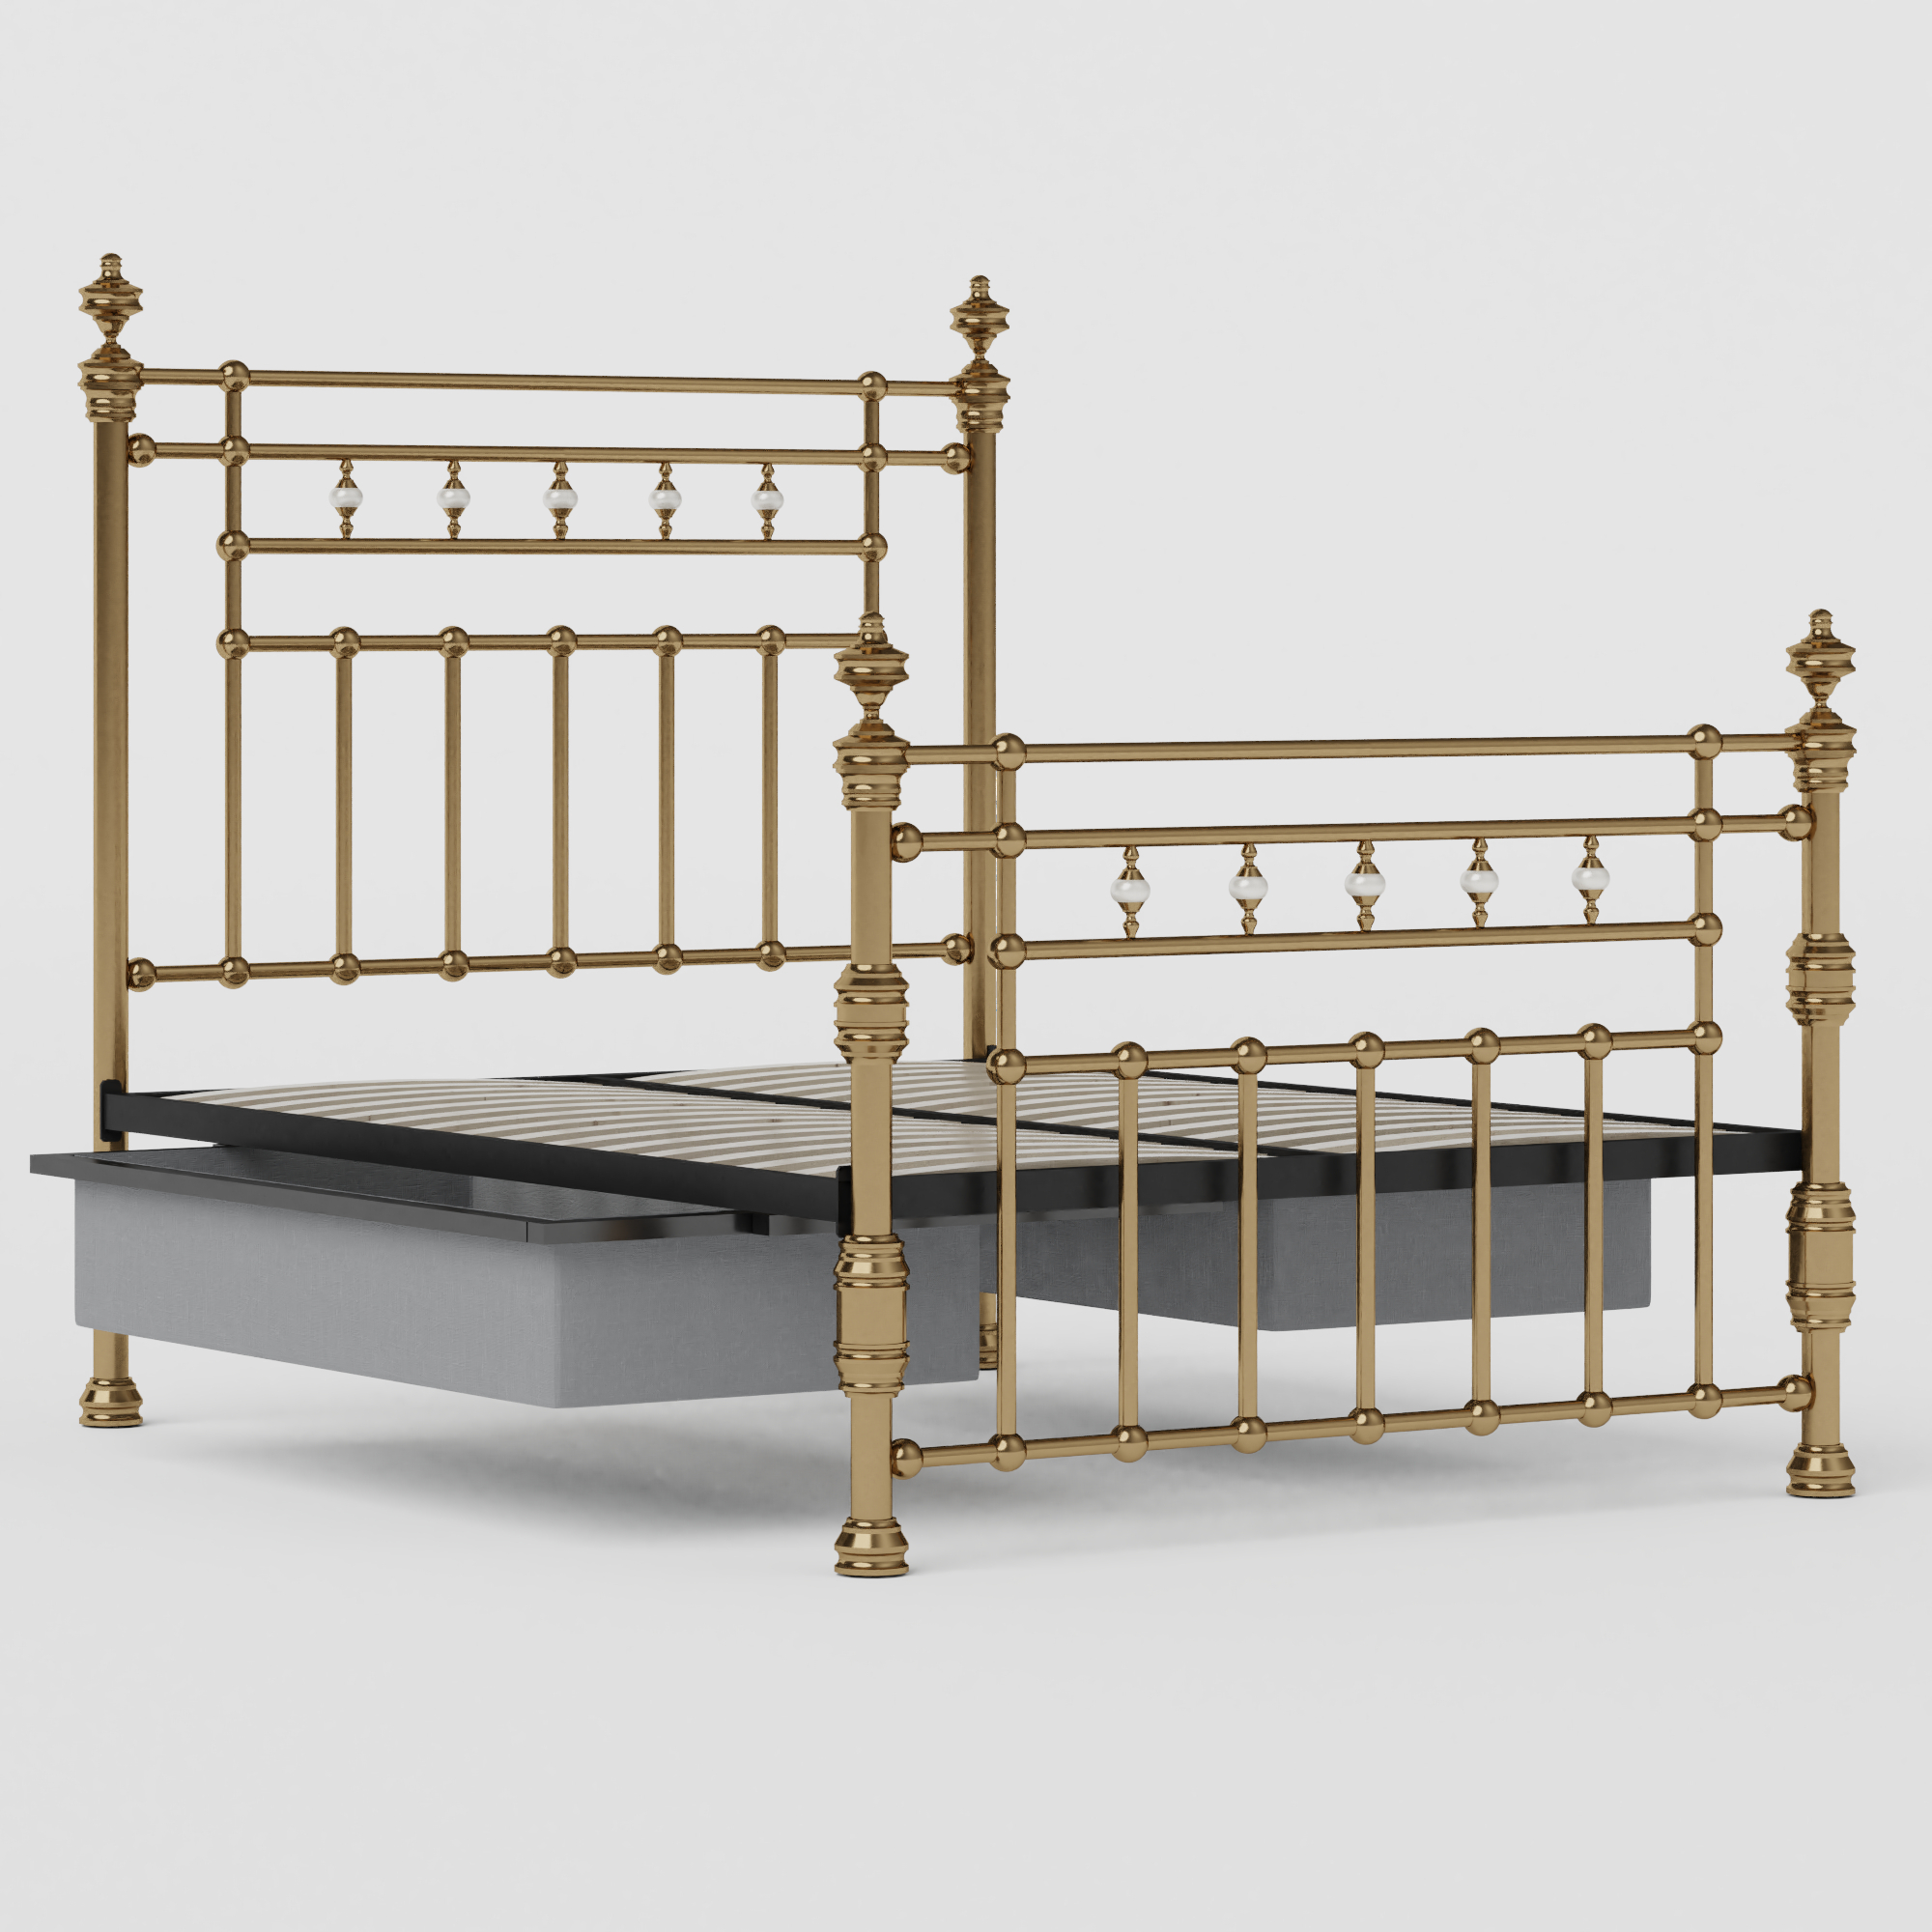 Boyne brass bed with drawers